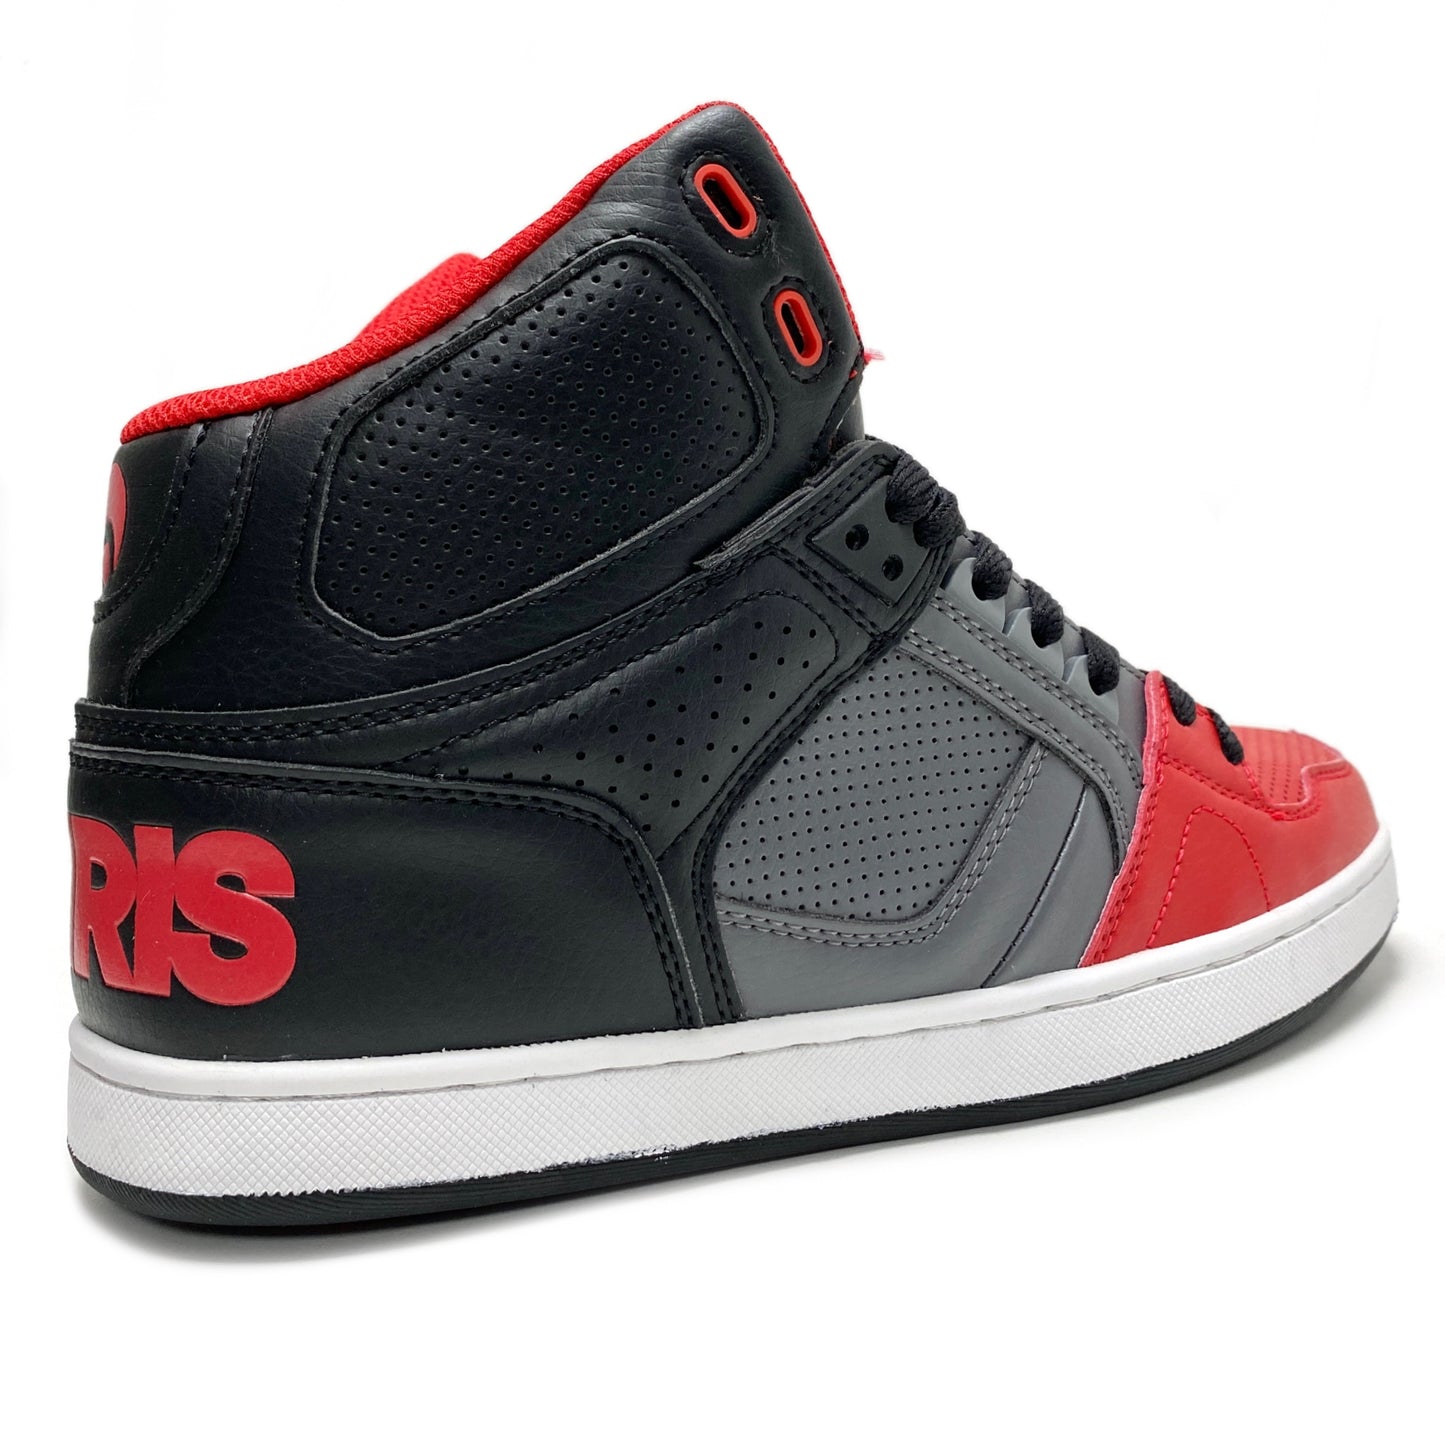 OSIRIS SHOES NYC 83 CLK BLACK RED & GREY TRAINERS